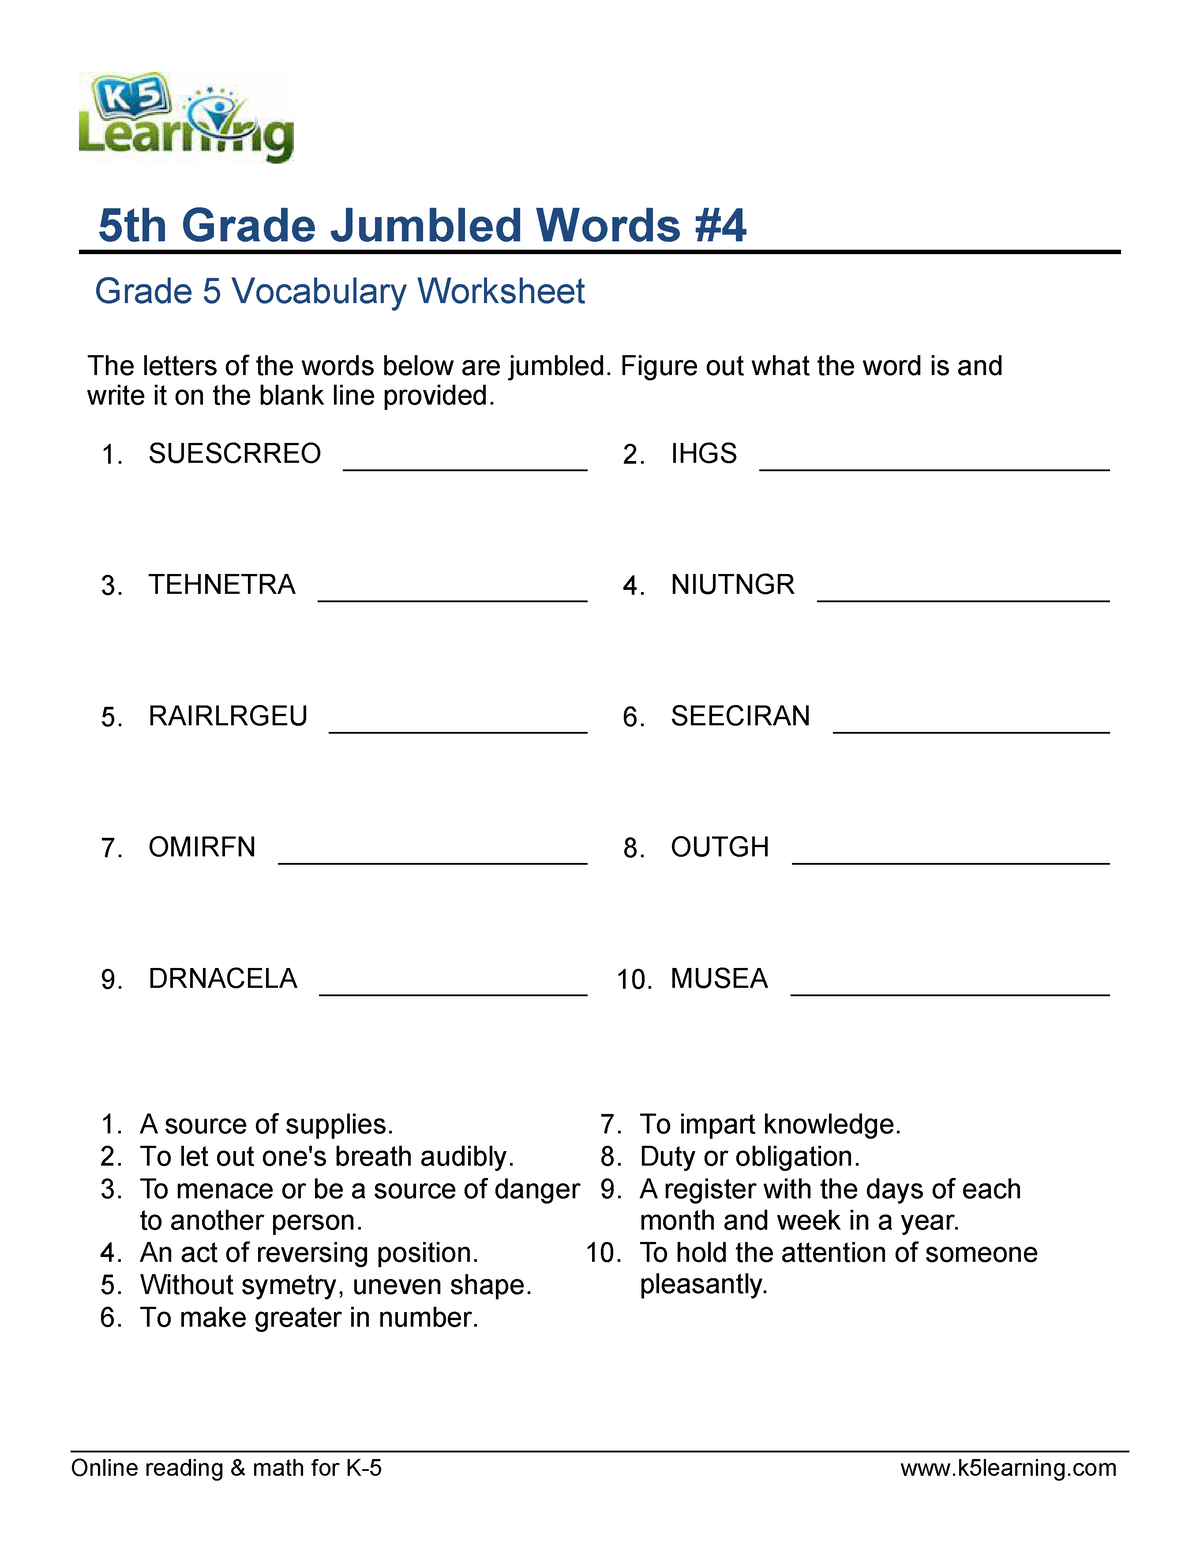 english-for-5th-grade-jumbled-words-4-online-reading-math-for-k-5